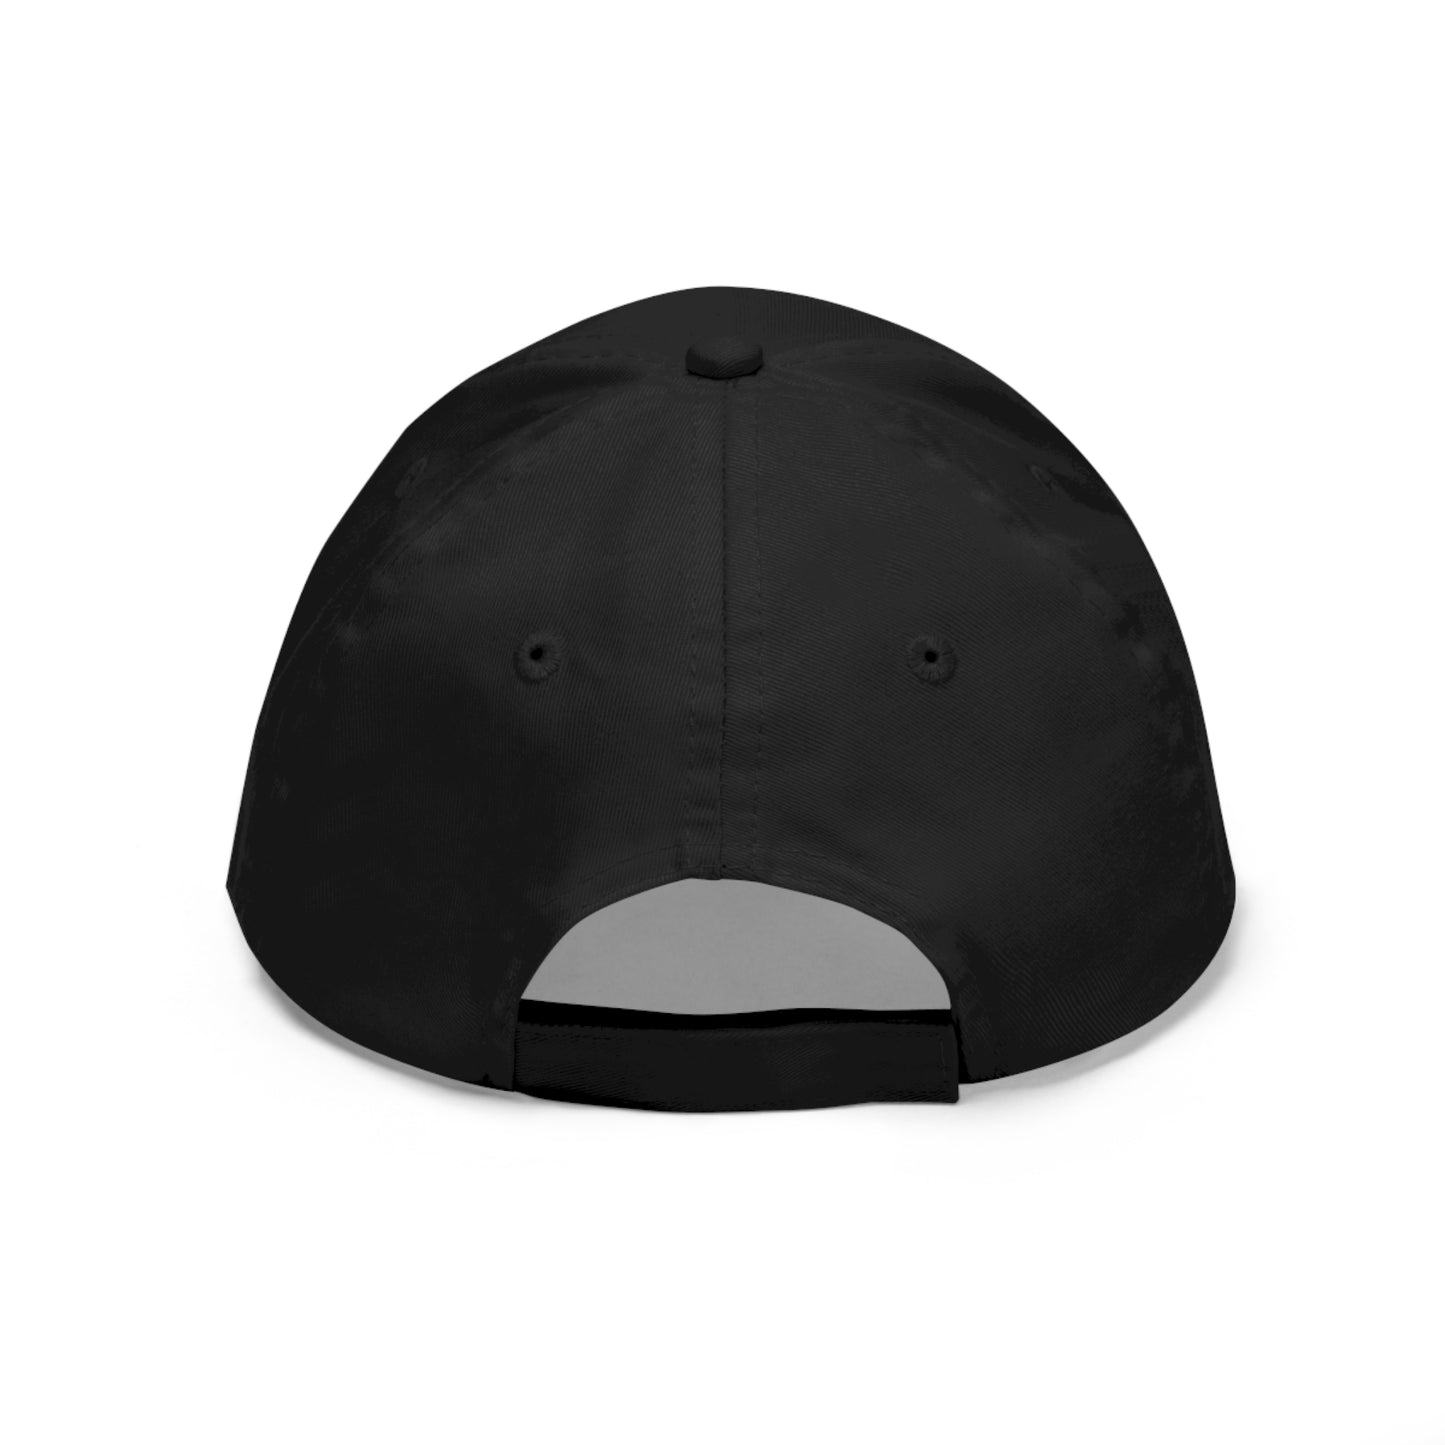 FAMA Collective Twill Hat